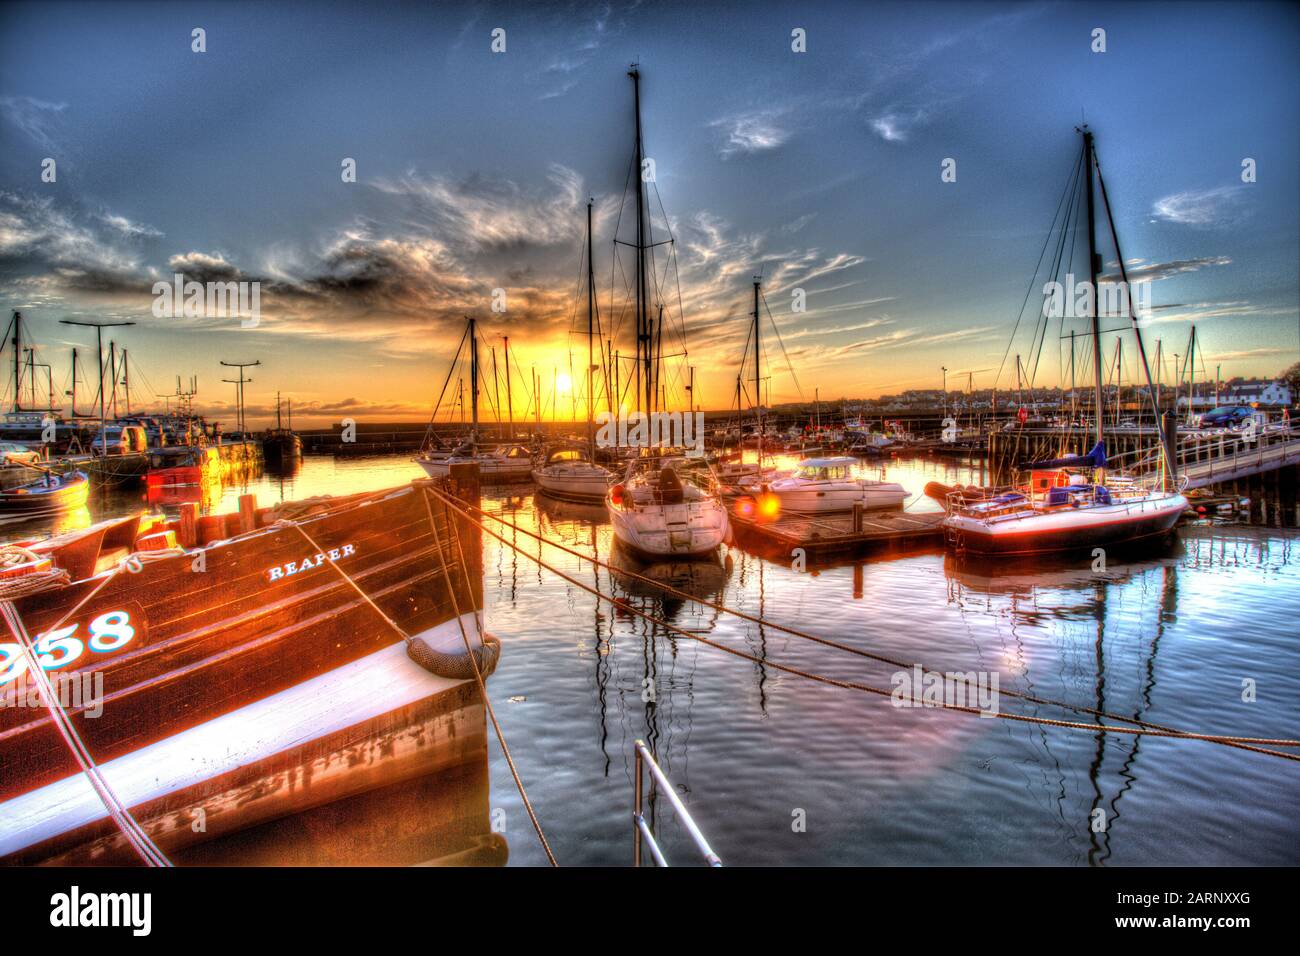 Town of Anstruther, Scotland. Artistic sunset view of leisure and fishing boats berthed at Anstruther Harbour. Stock Photo